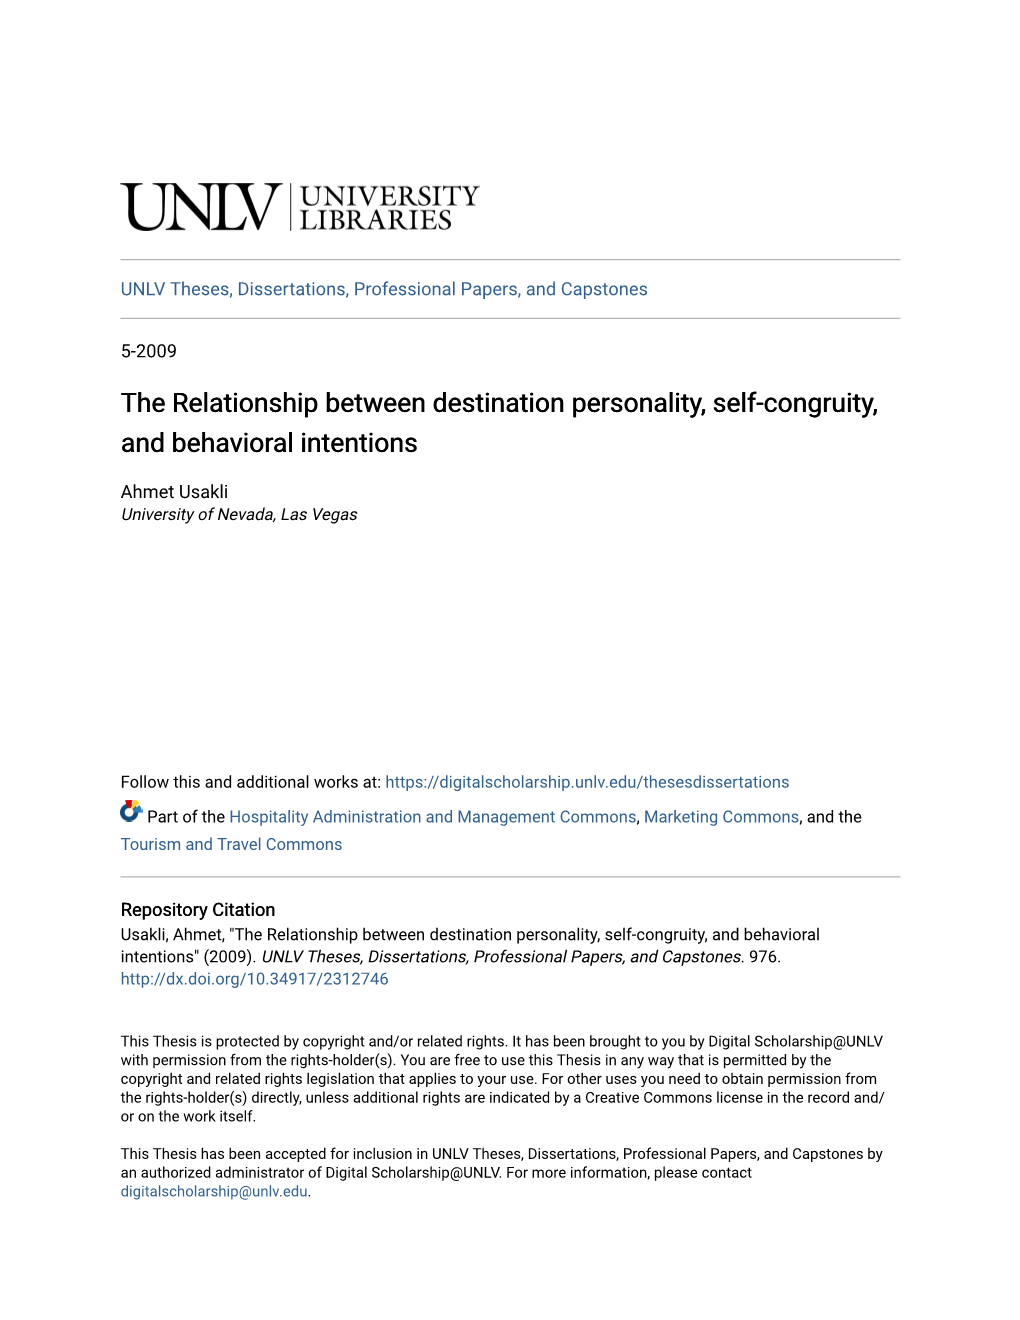 The Relationship Between Destination Personality, Self-Congruity, and Behavioral Intentions